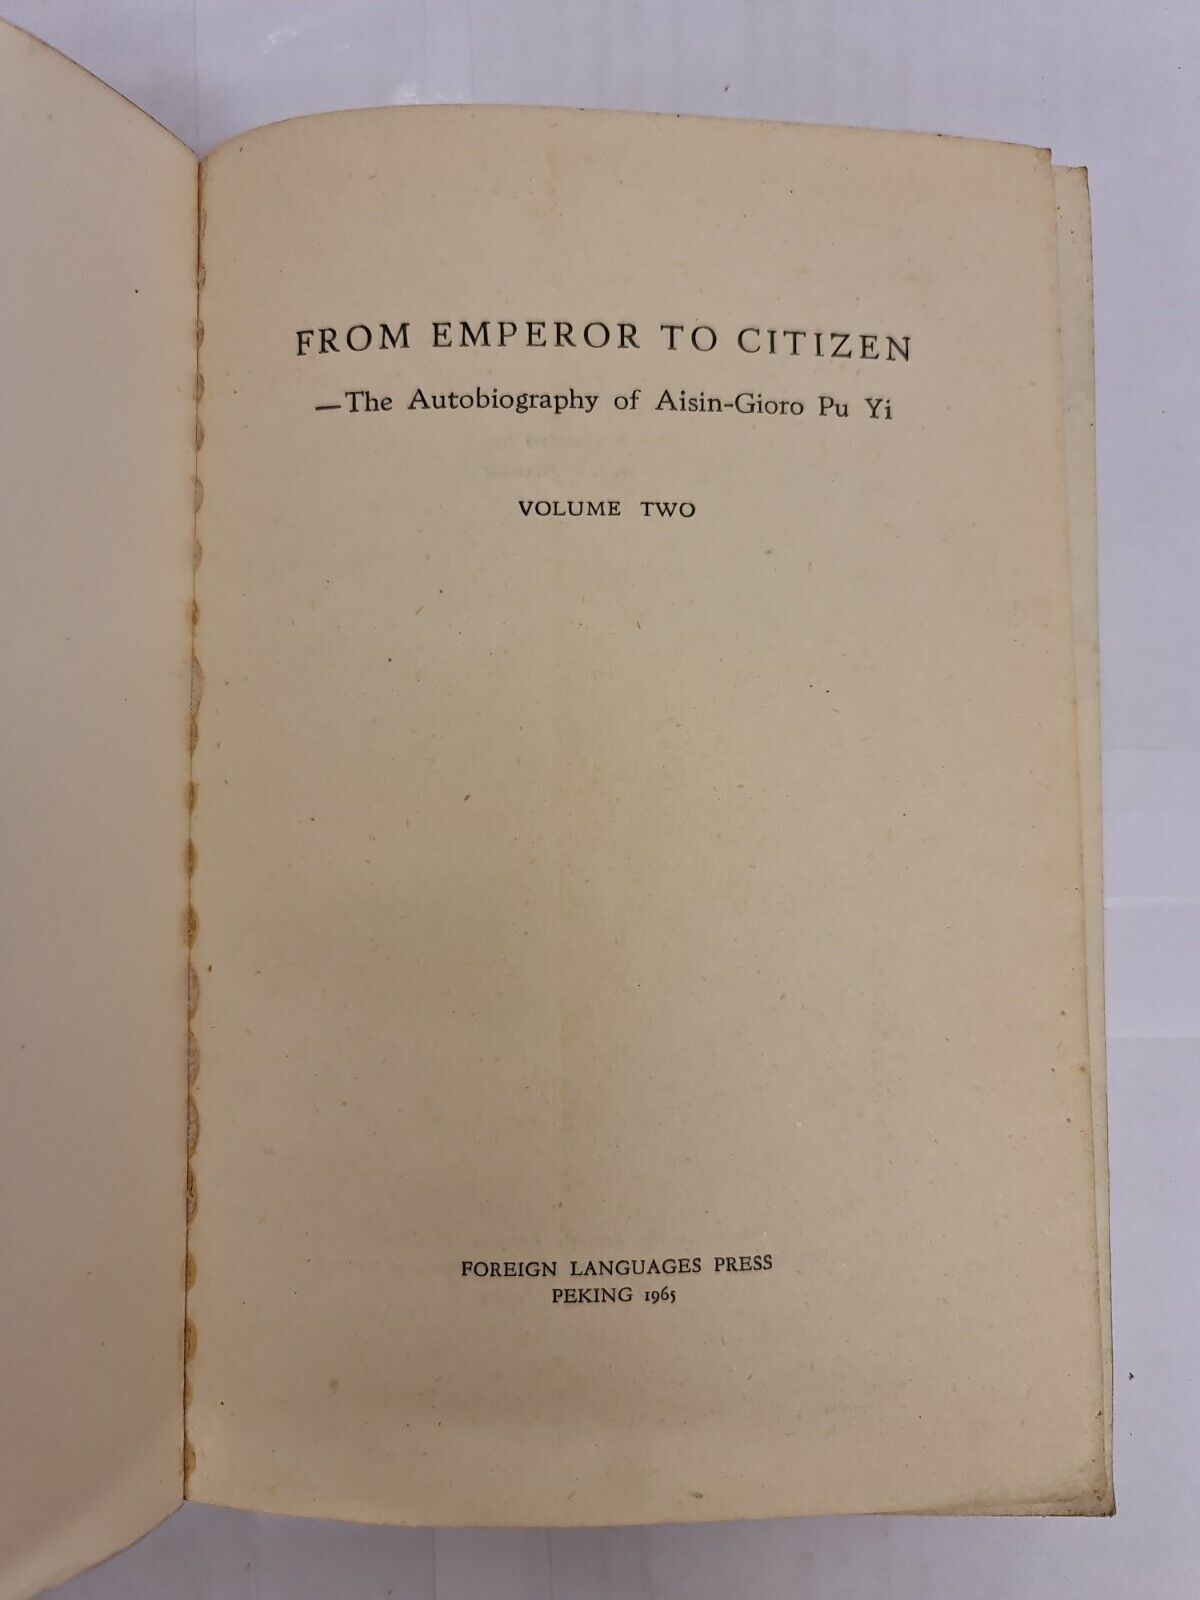 From Emperor to Citizen: The Autobiography of Aisin-Gioro Pu Yi: Volume Two